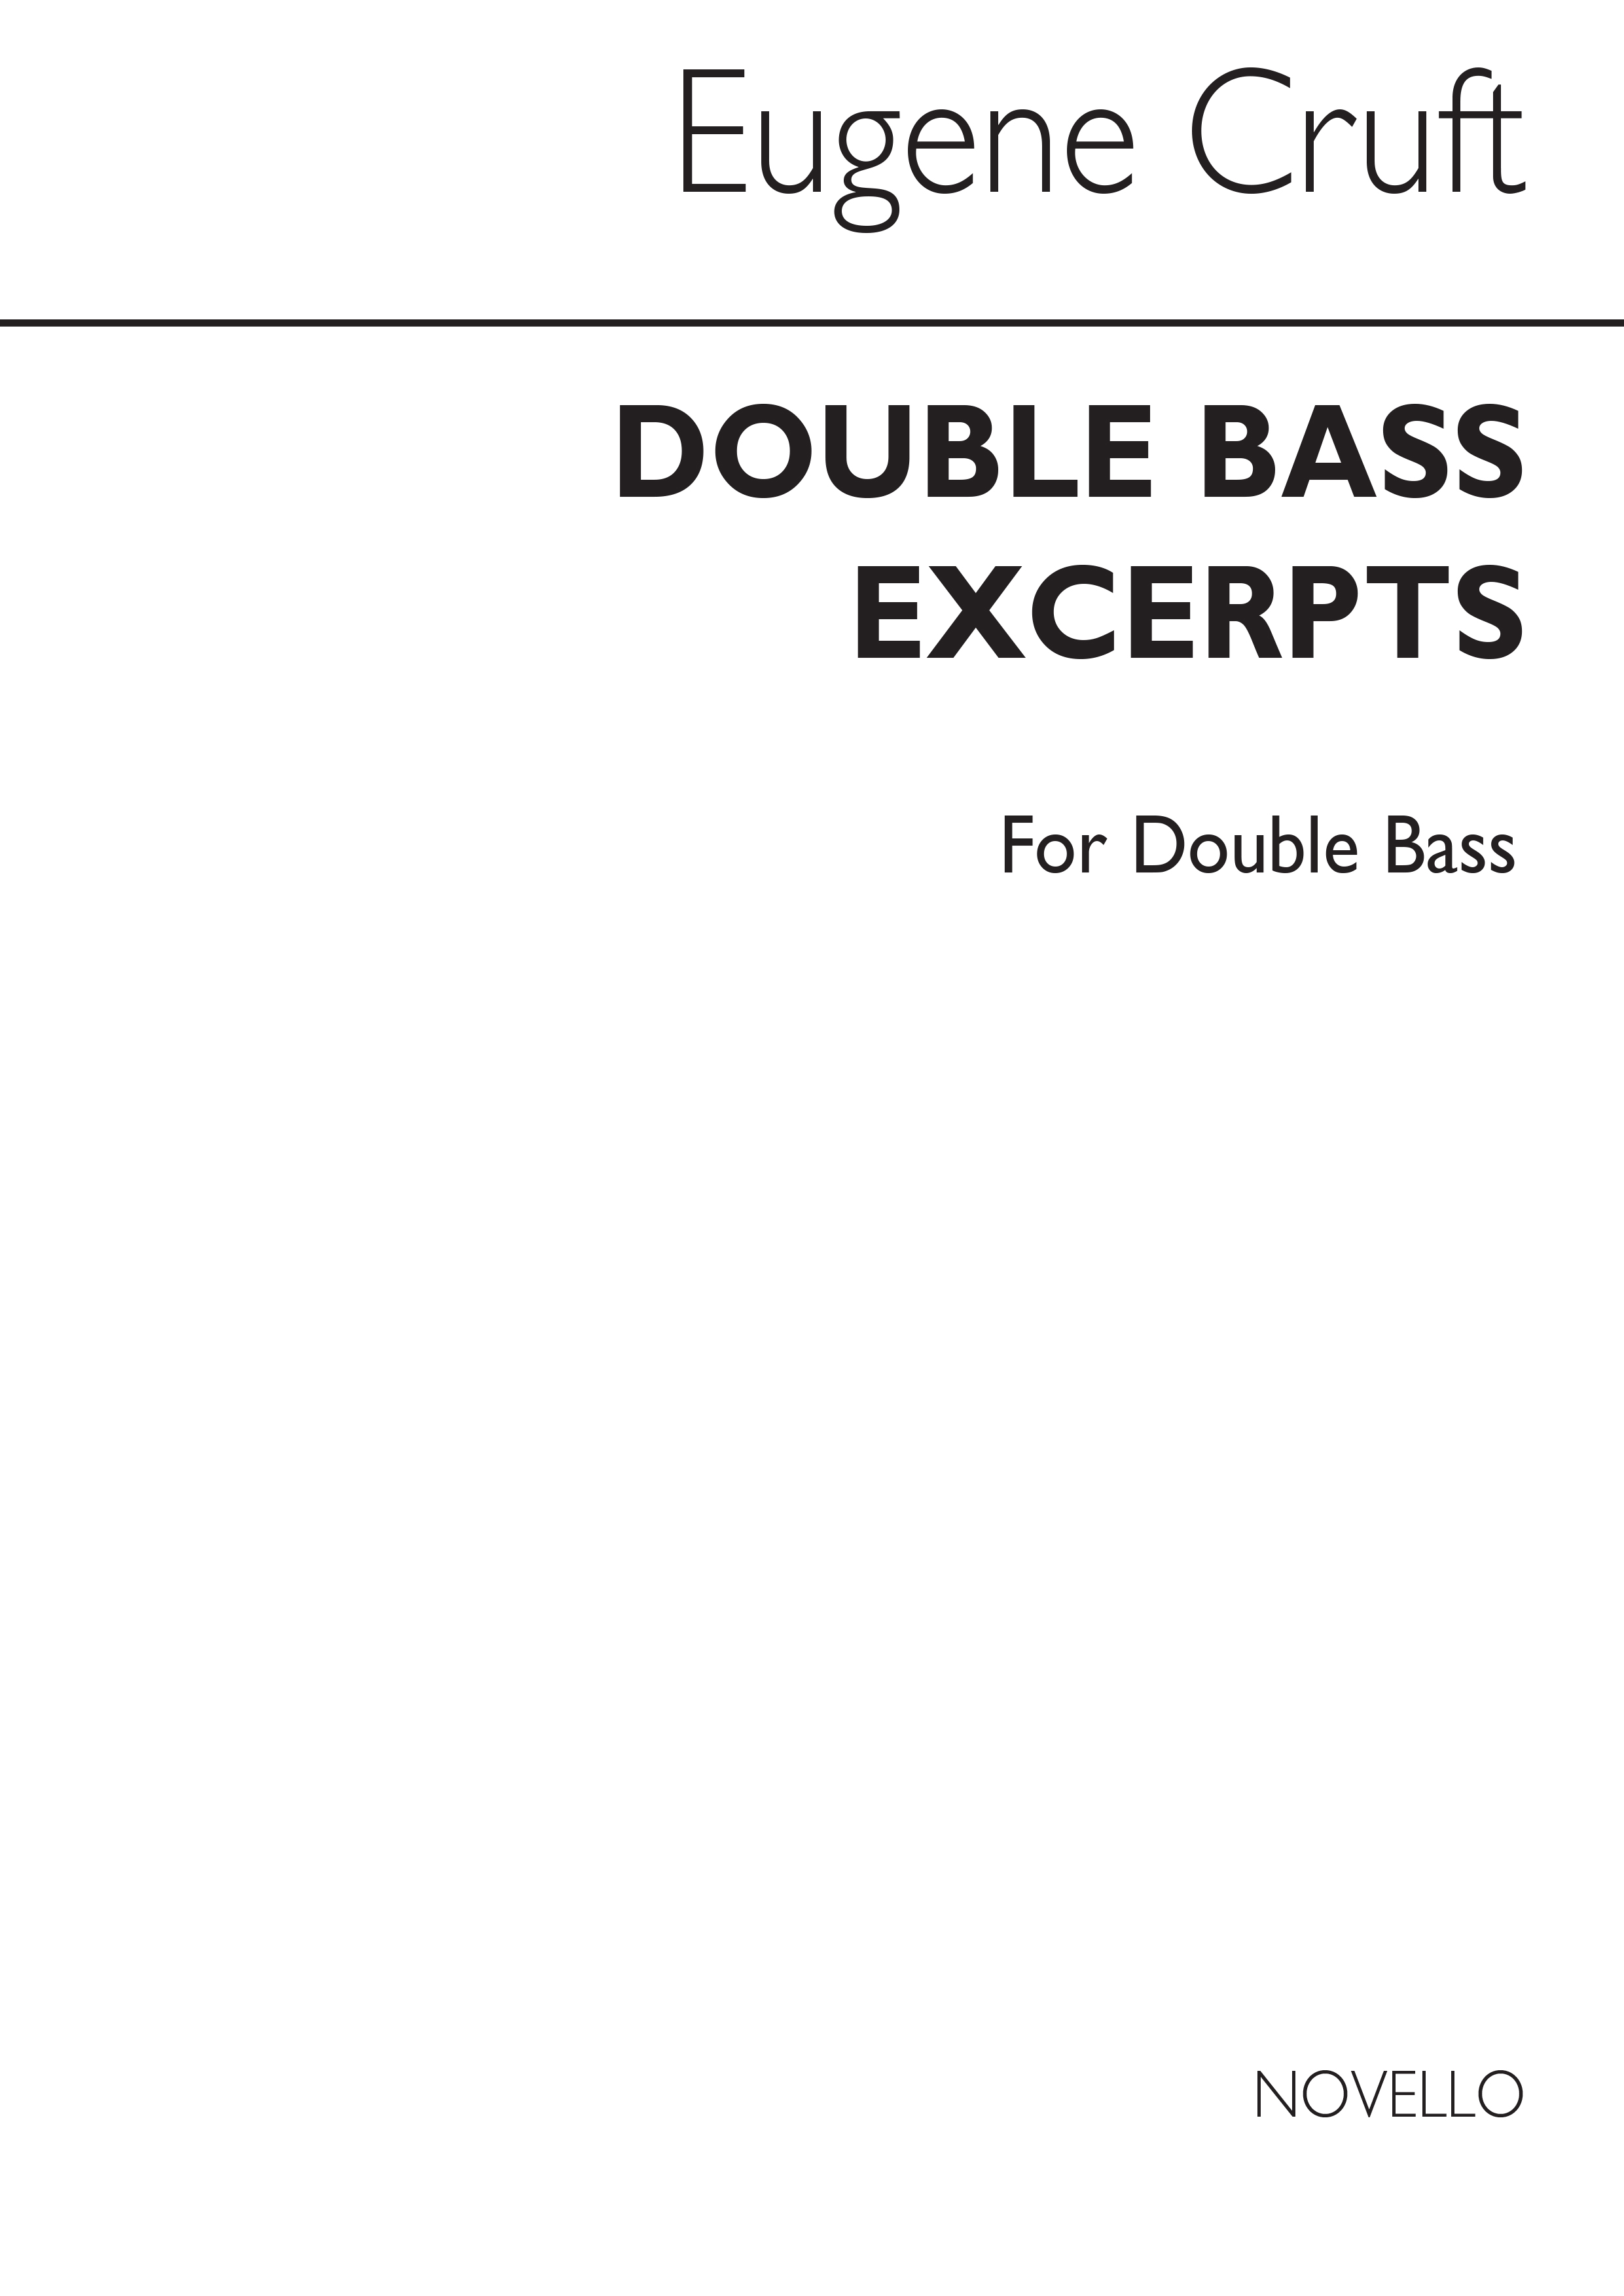 Cruft: Three Double Bass Excerpts